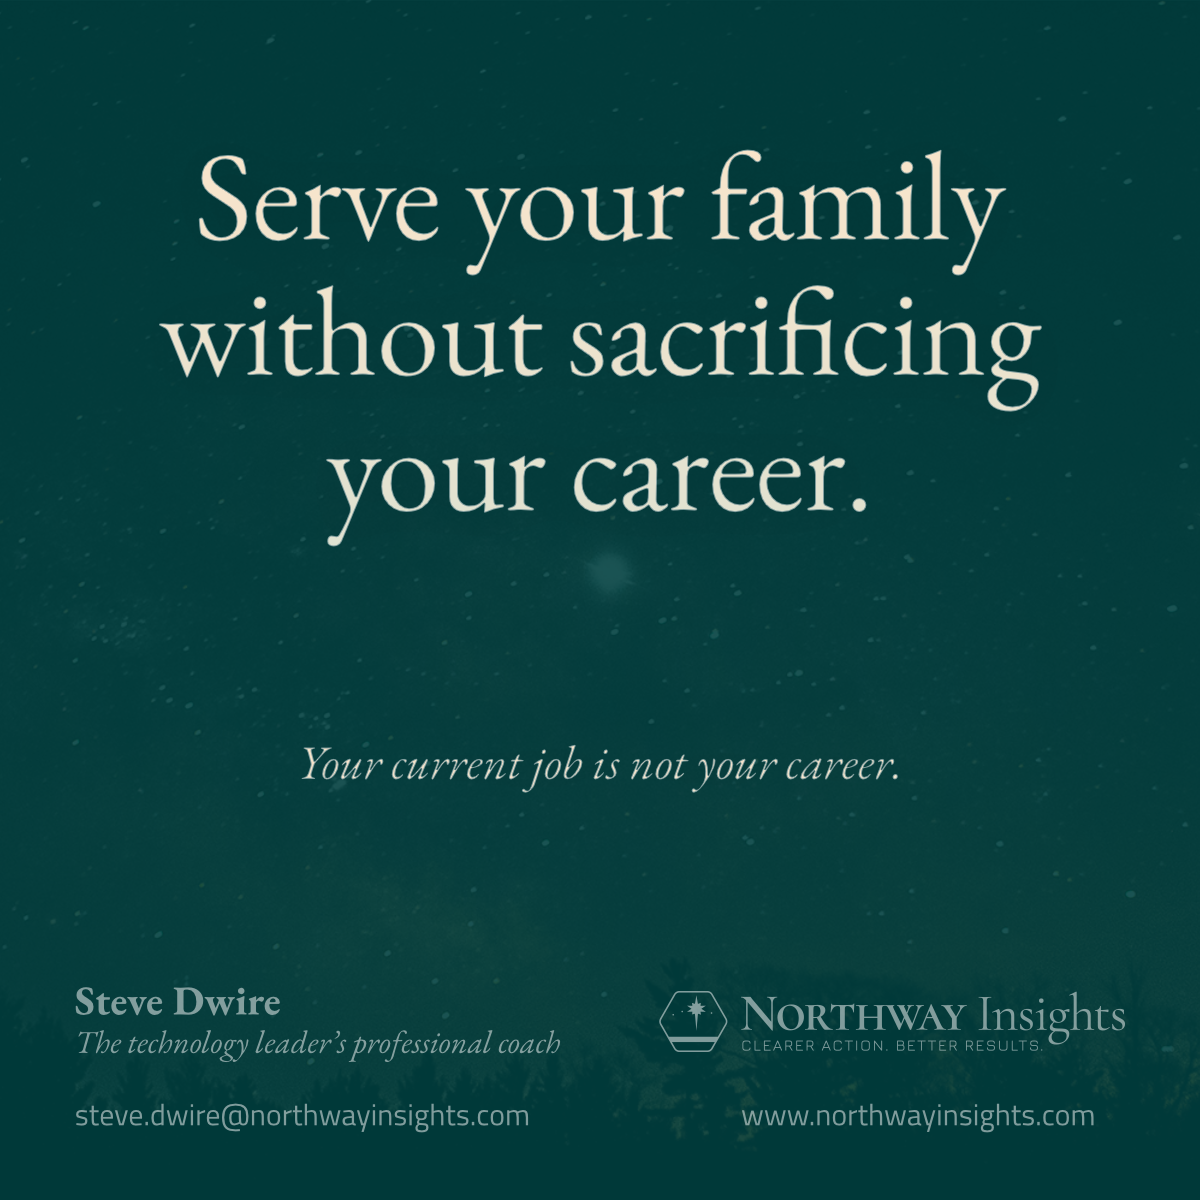 Serve your family without sacrificing your career